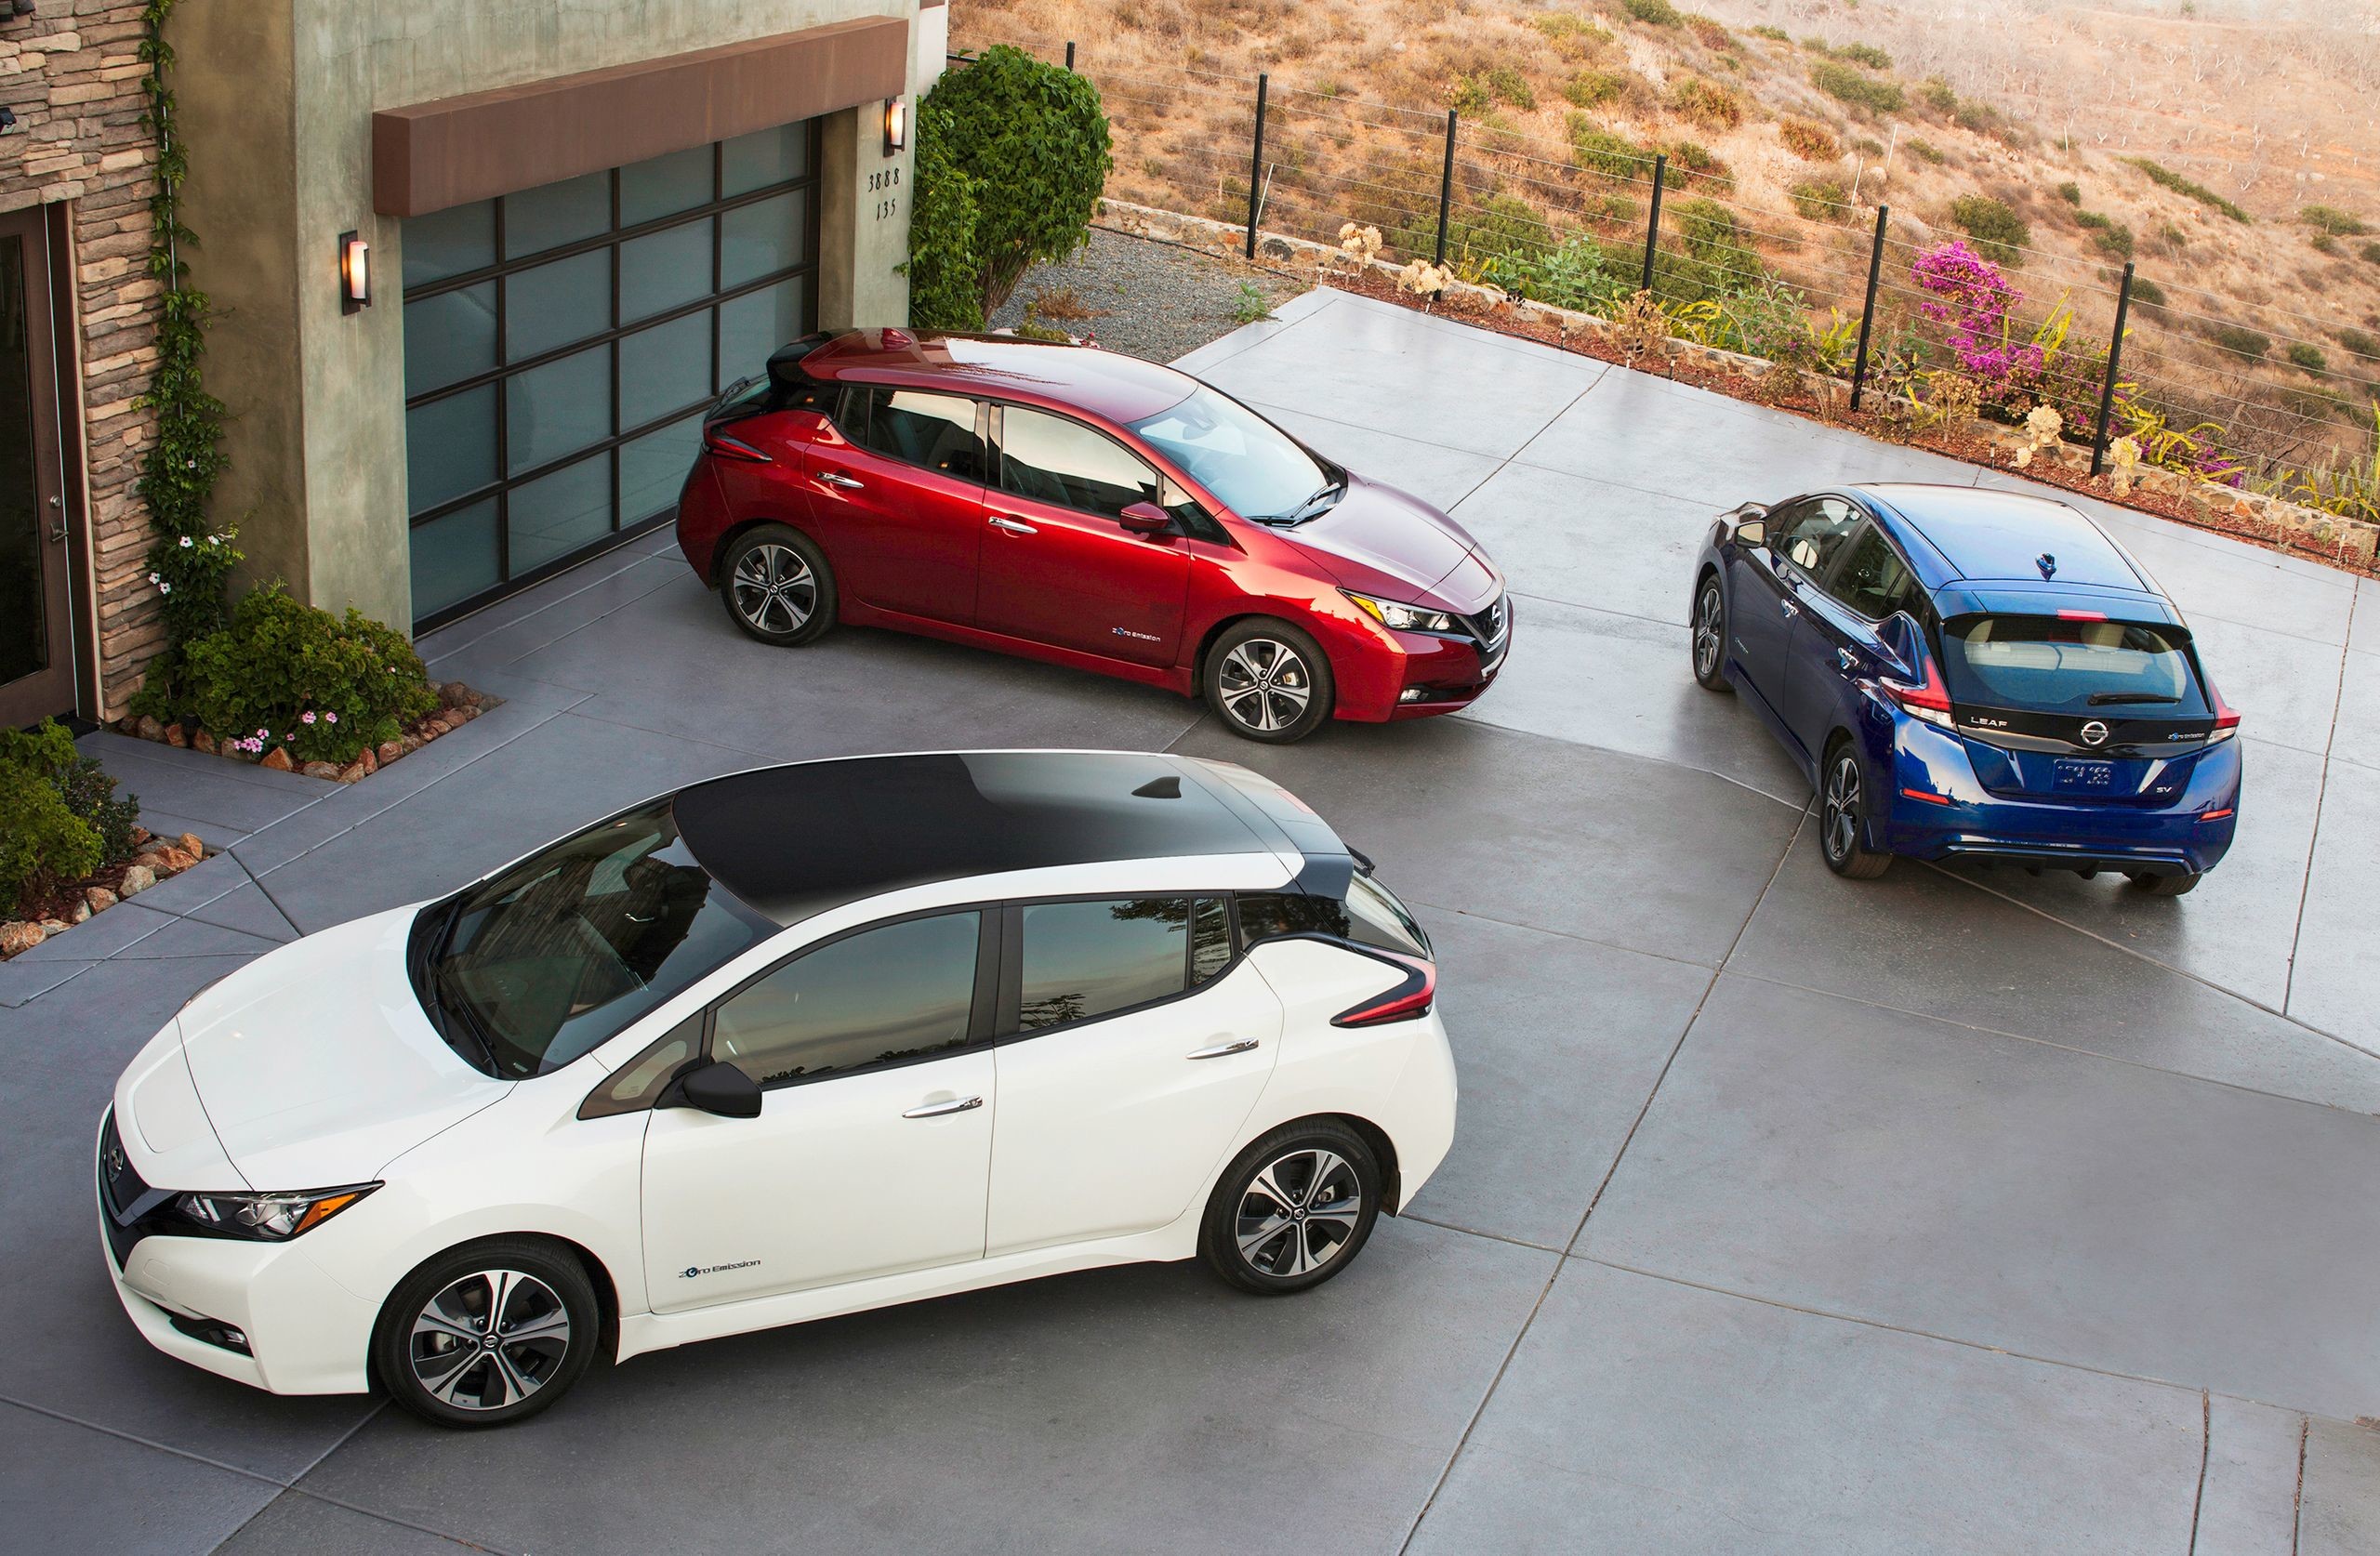 2560x1674 2018 Nissan LEAF Wallpaper Galore: Own It In January, On Your Desktop Now